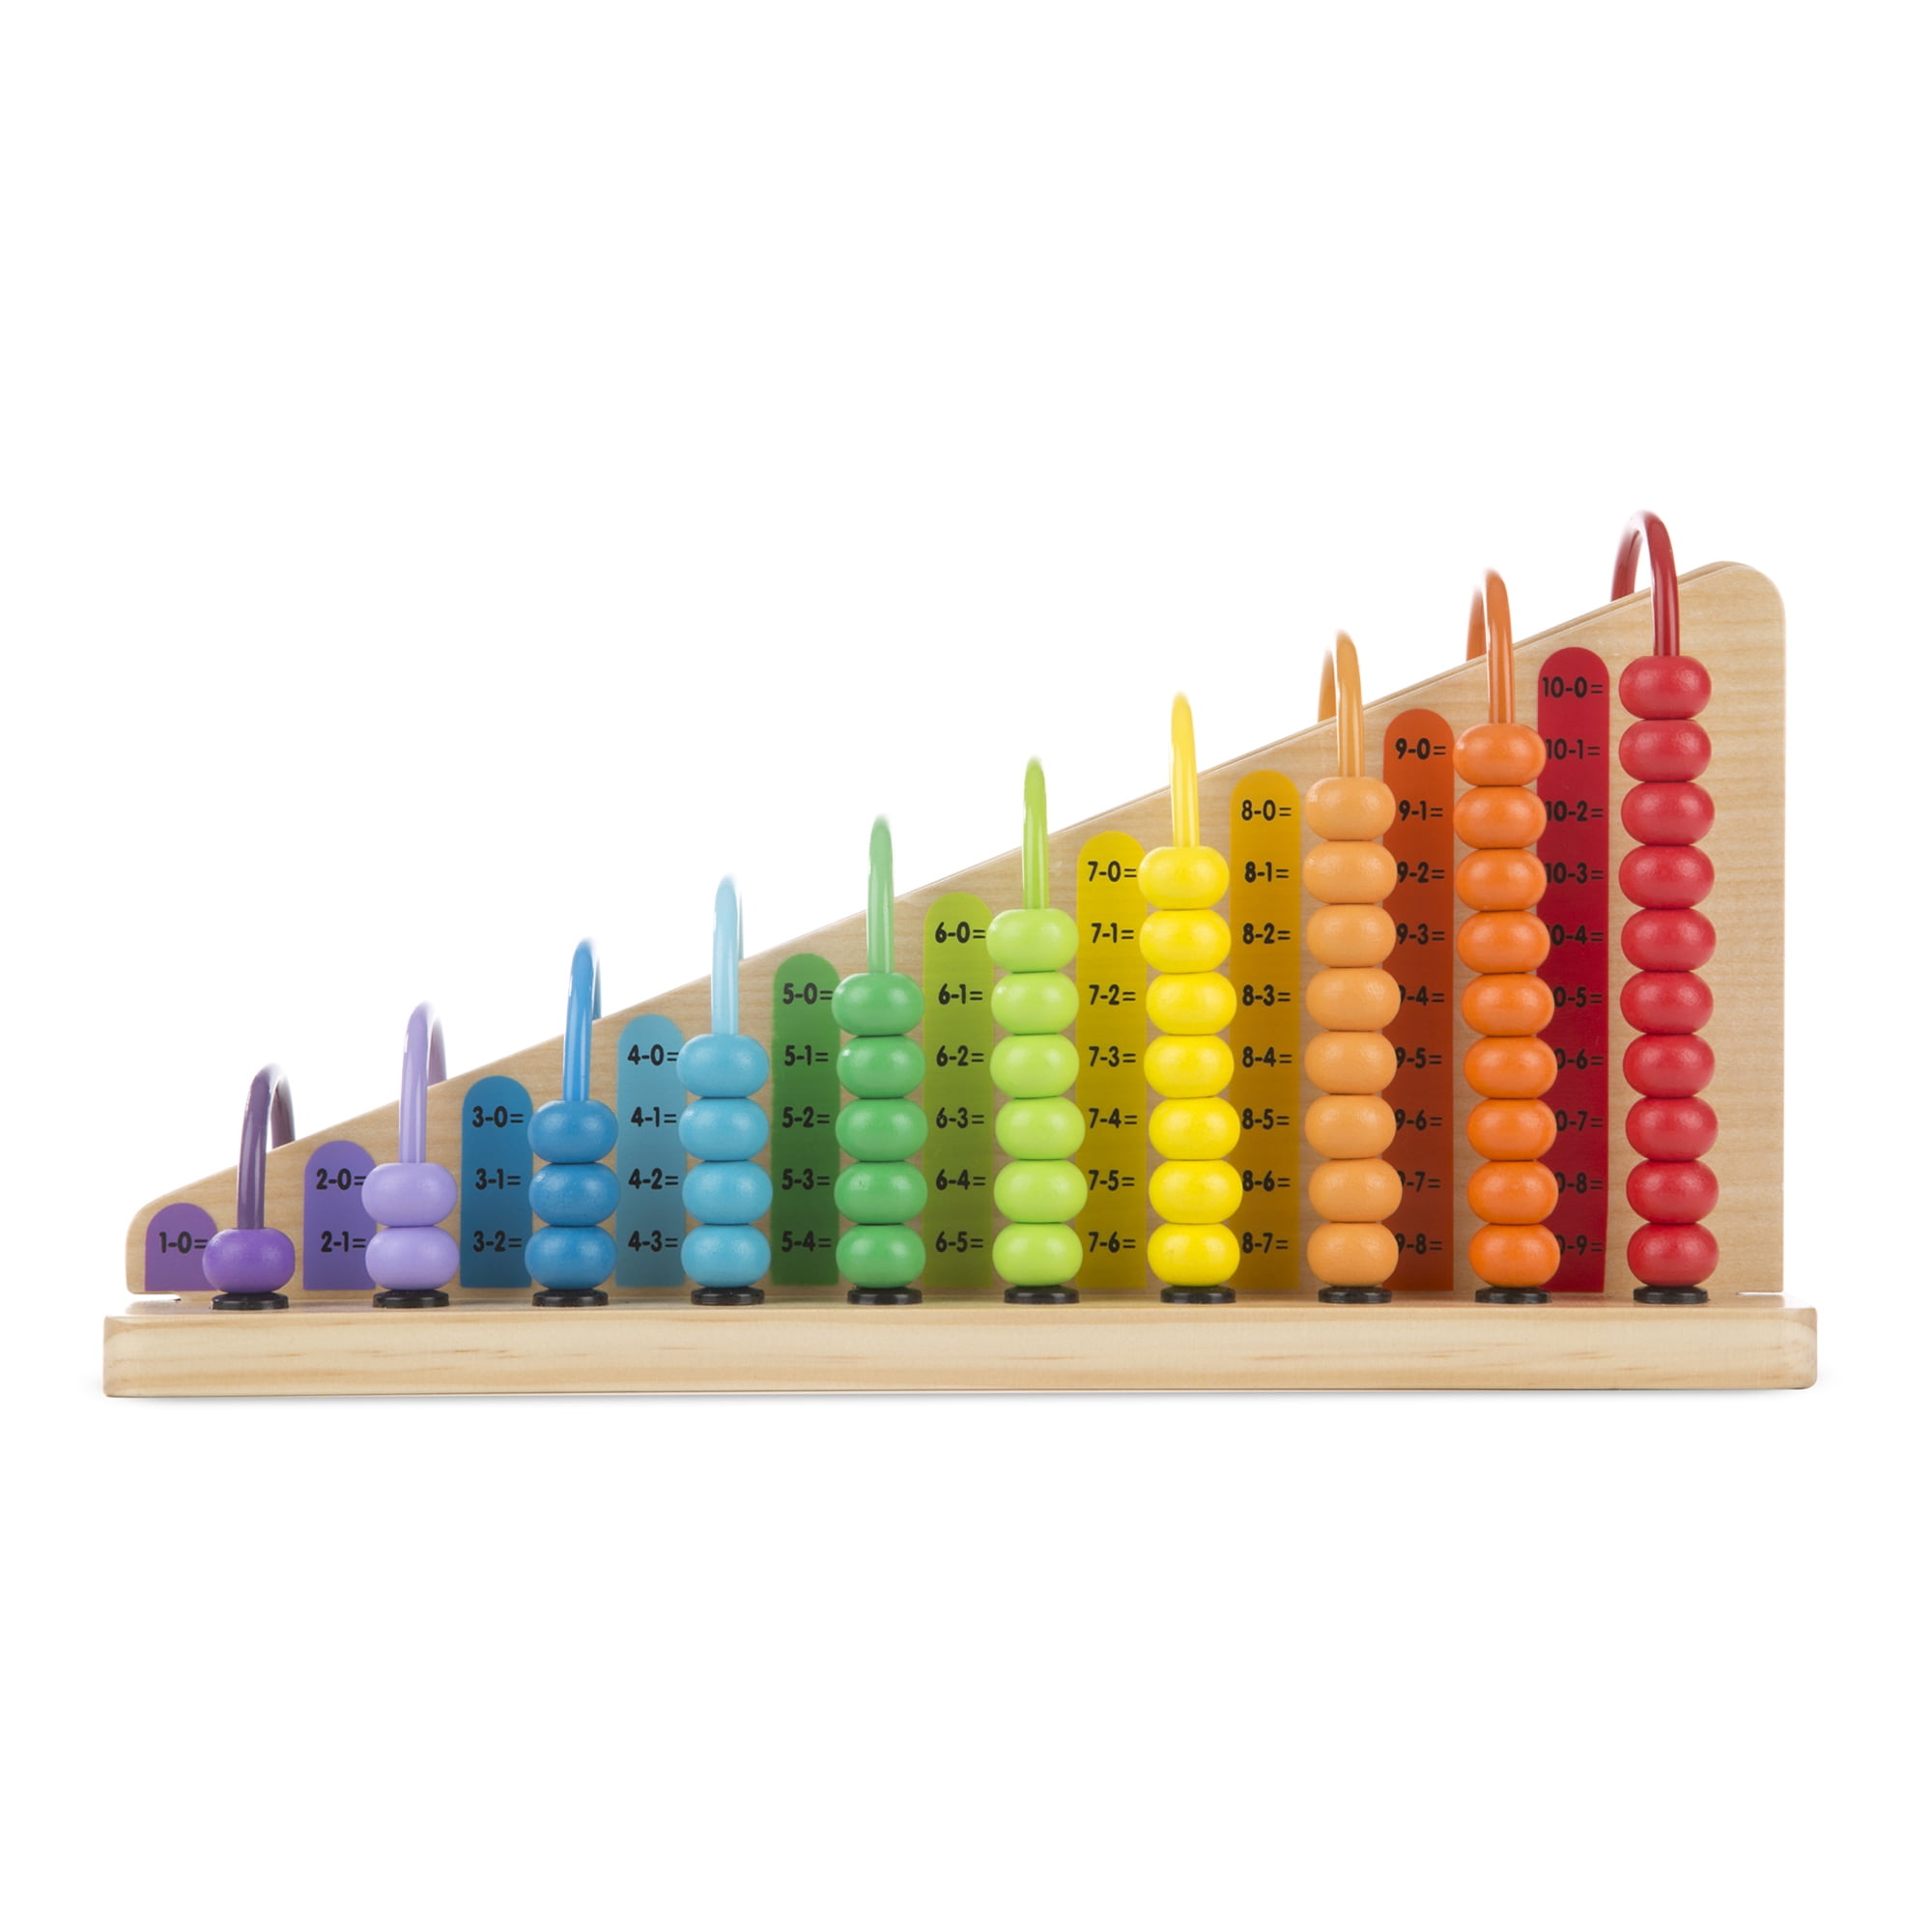 Melissa & Doug Classic Wooden Abacus for sale online 